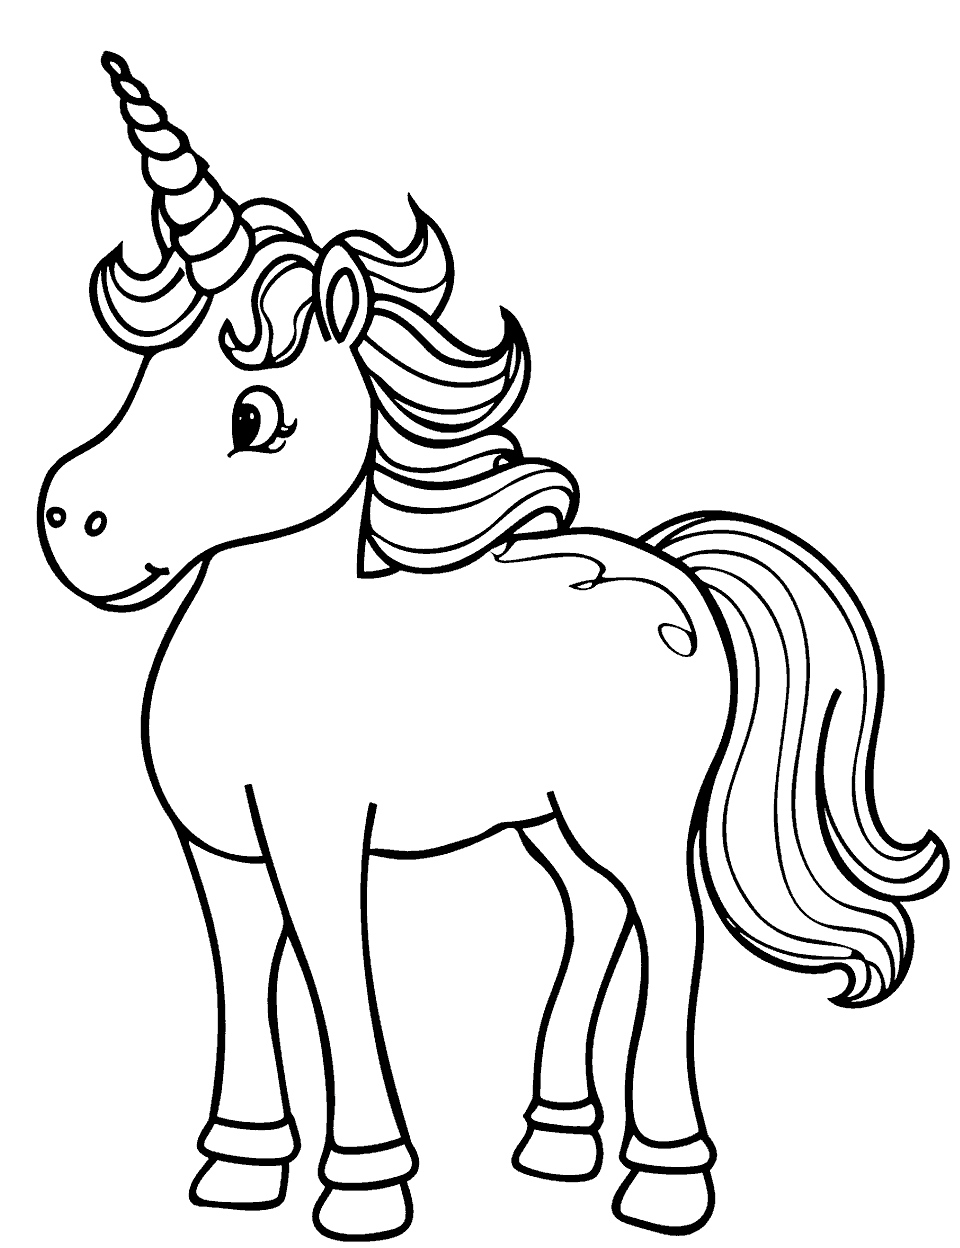 Magical Unicorn Coloring Page - A magical unicorn with a long flowing mane.